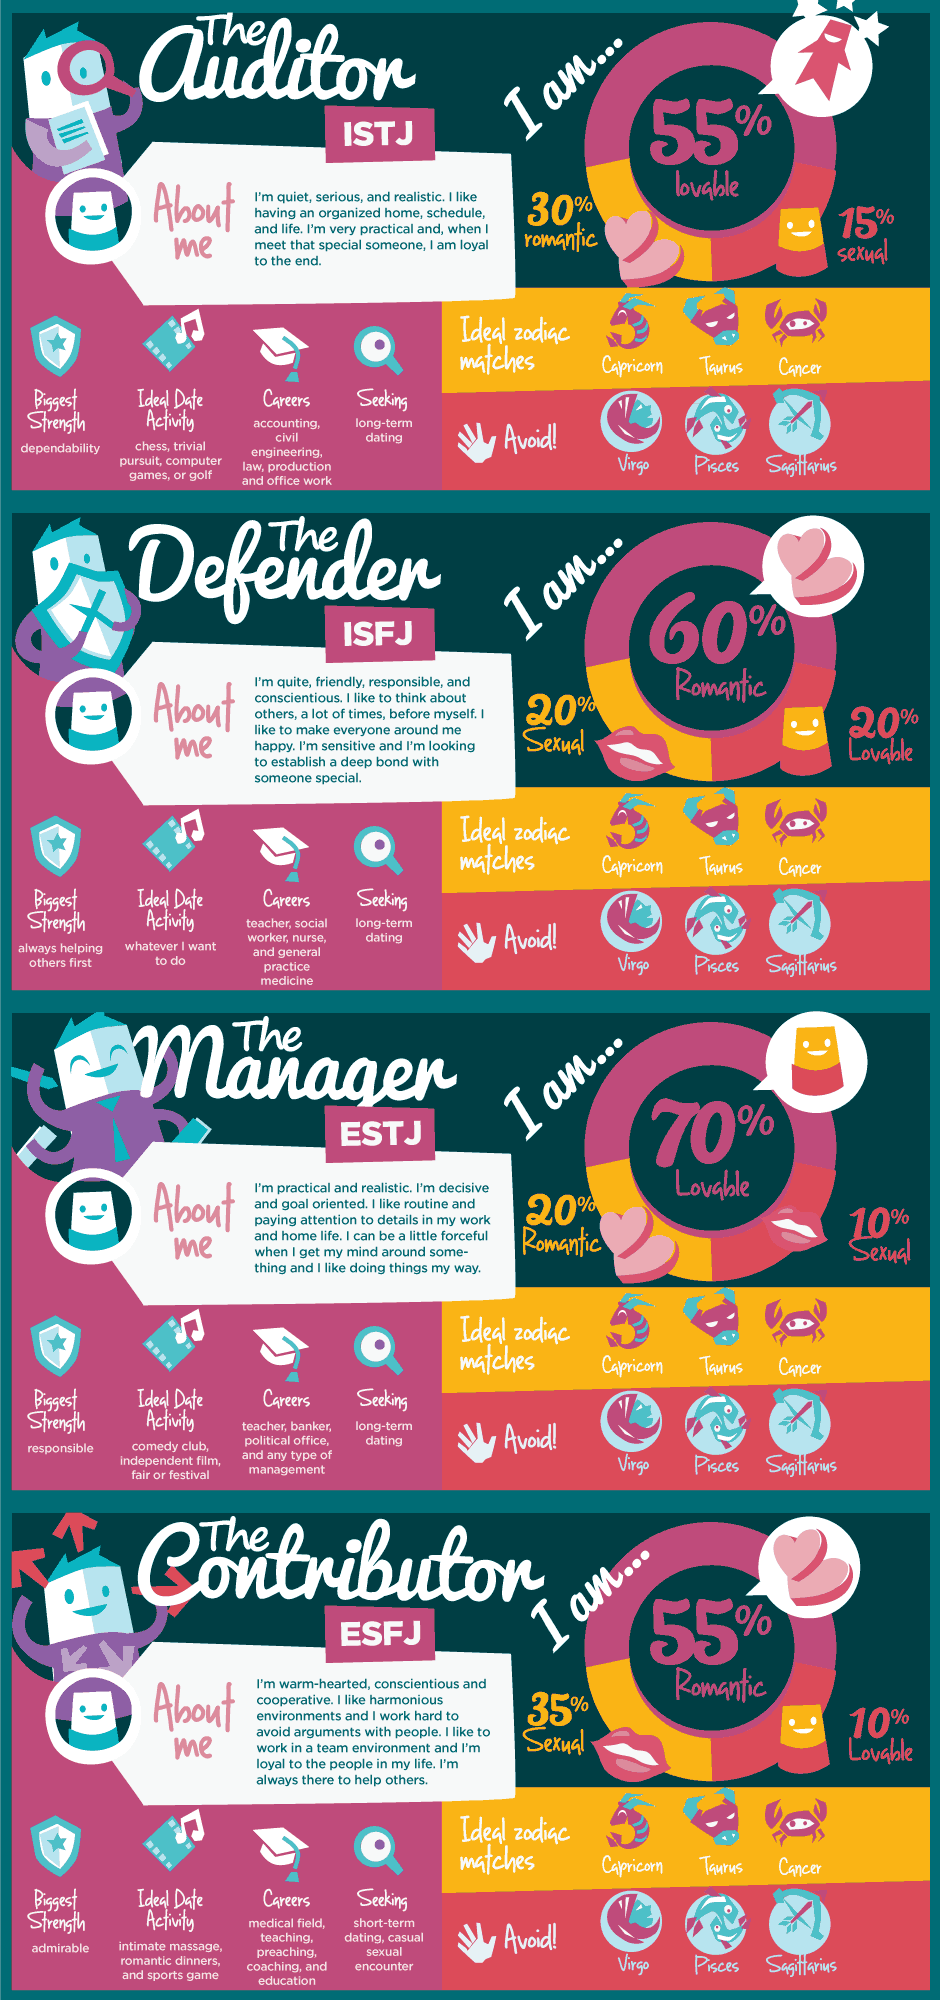 mbti-dating-infographic-section2